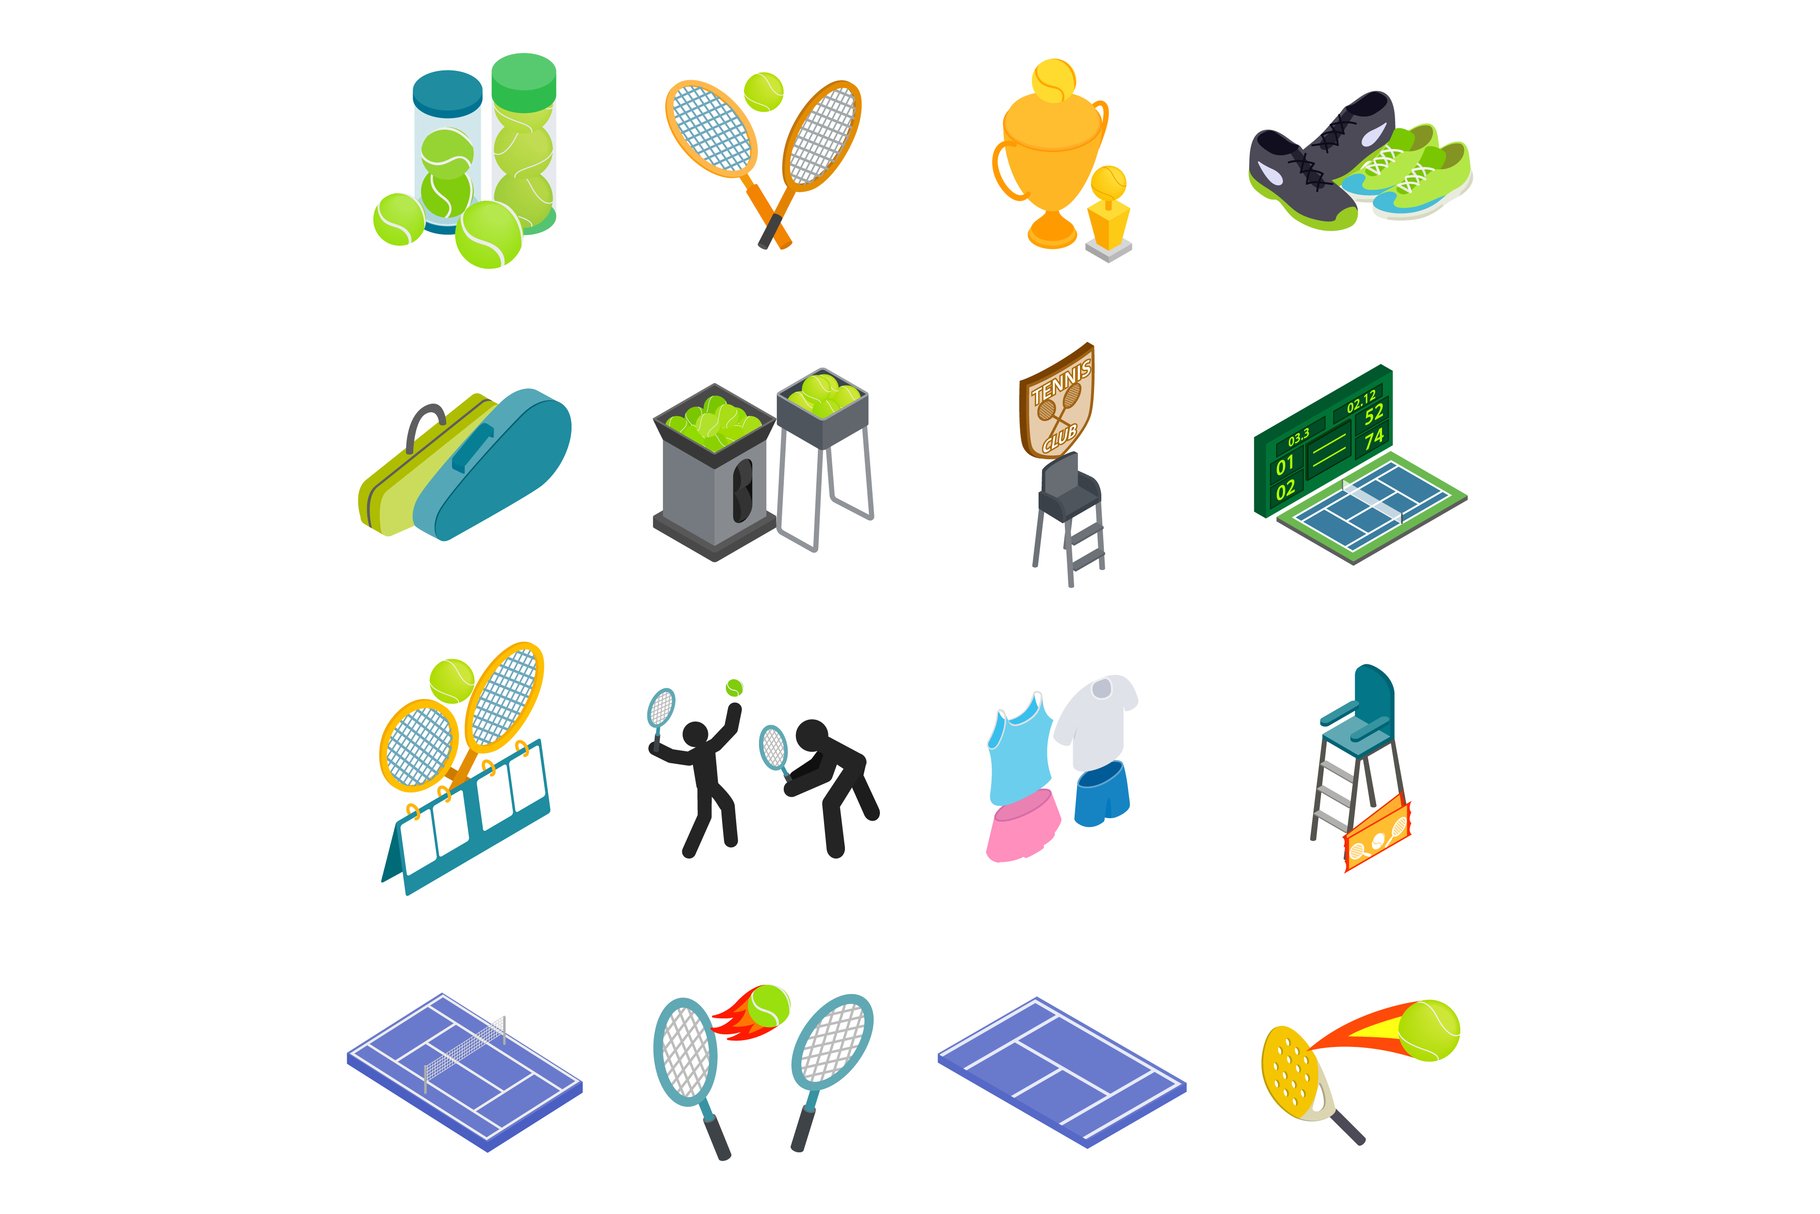 Tennis icons set, isometric style cover image.